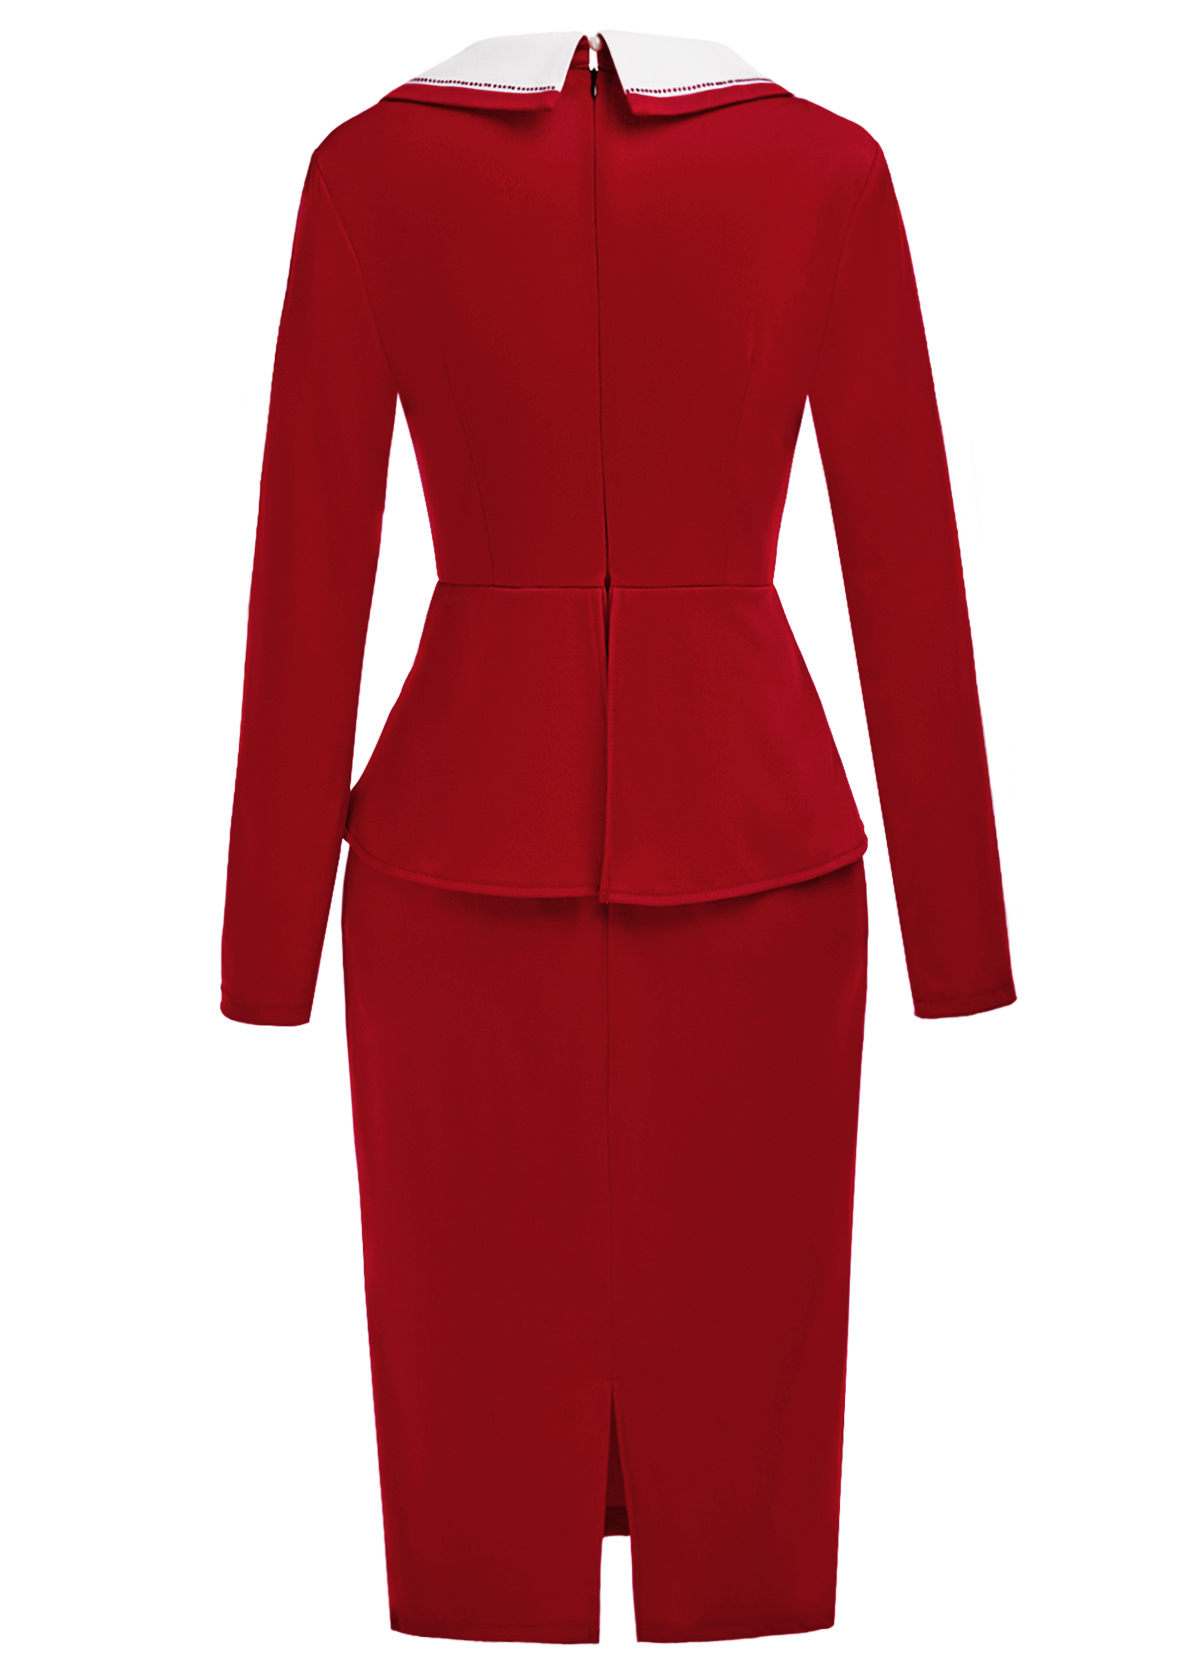 Patchwork Wine Red Long Sleeve Square Neck Bodycon Dress